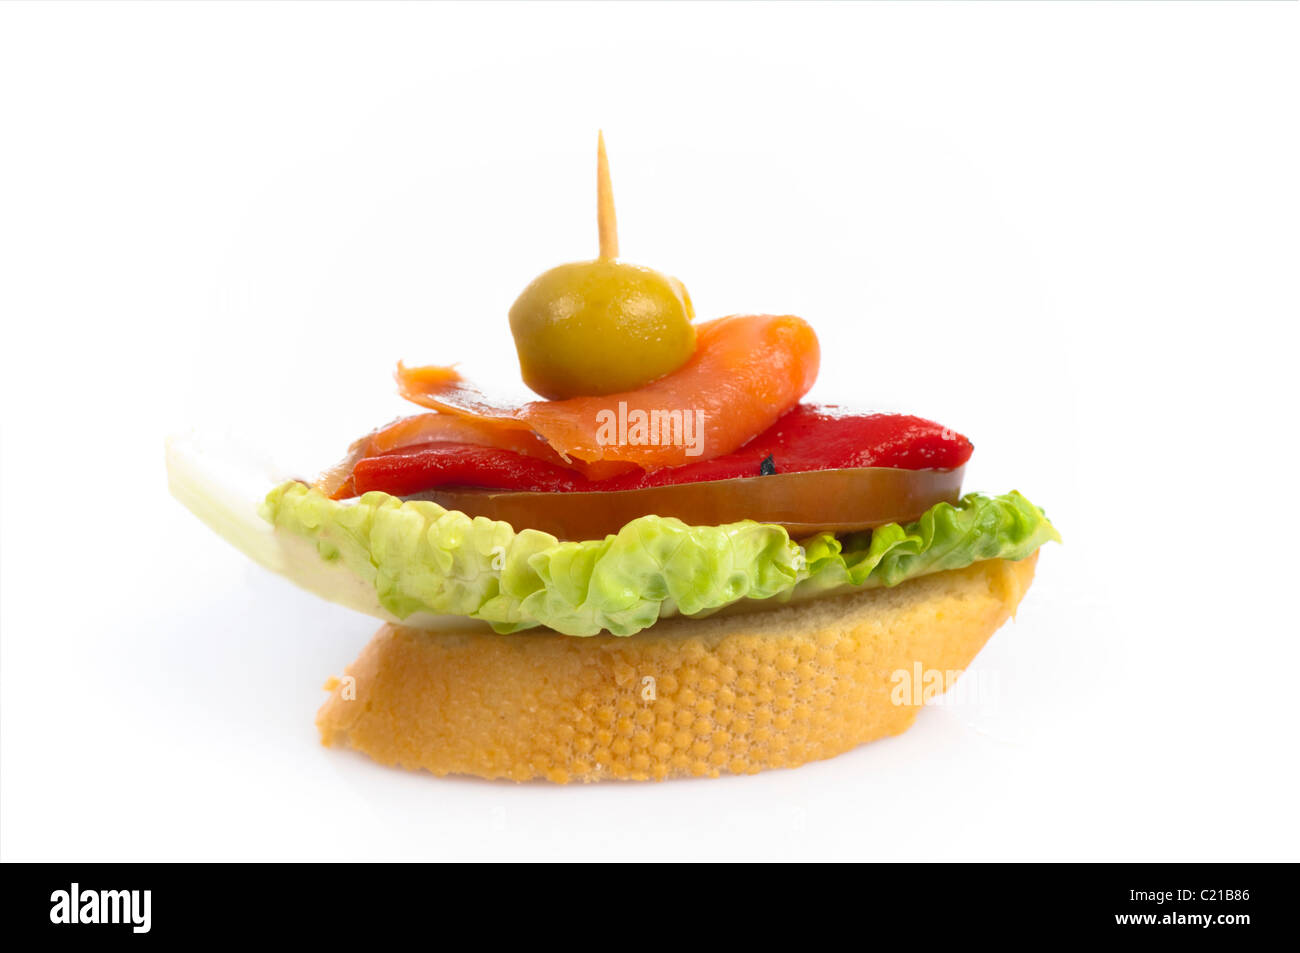 Small canape of smoked salmon, lettuce, peppers and tomato on a slice of baguette. Stock Photo